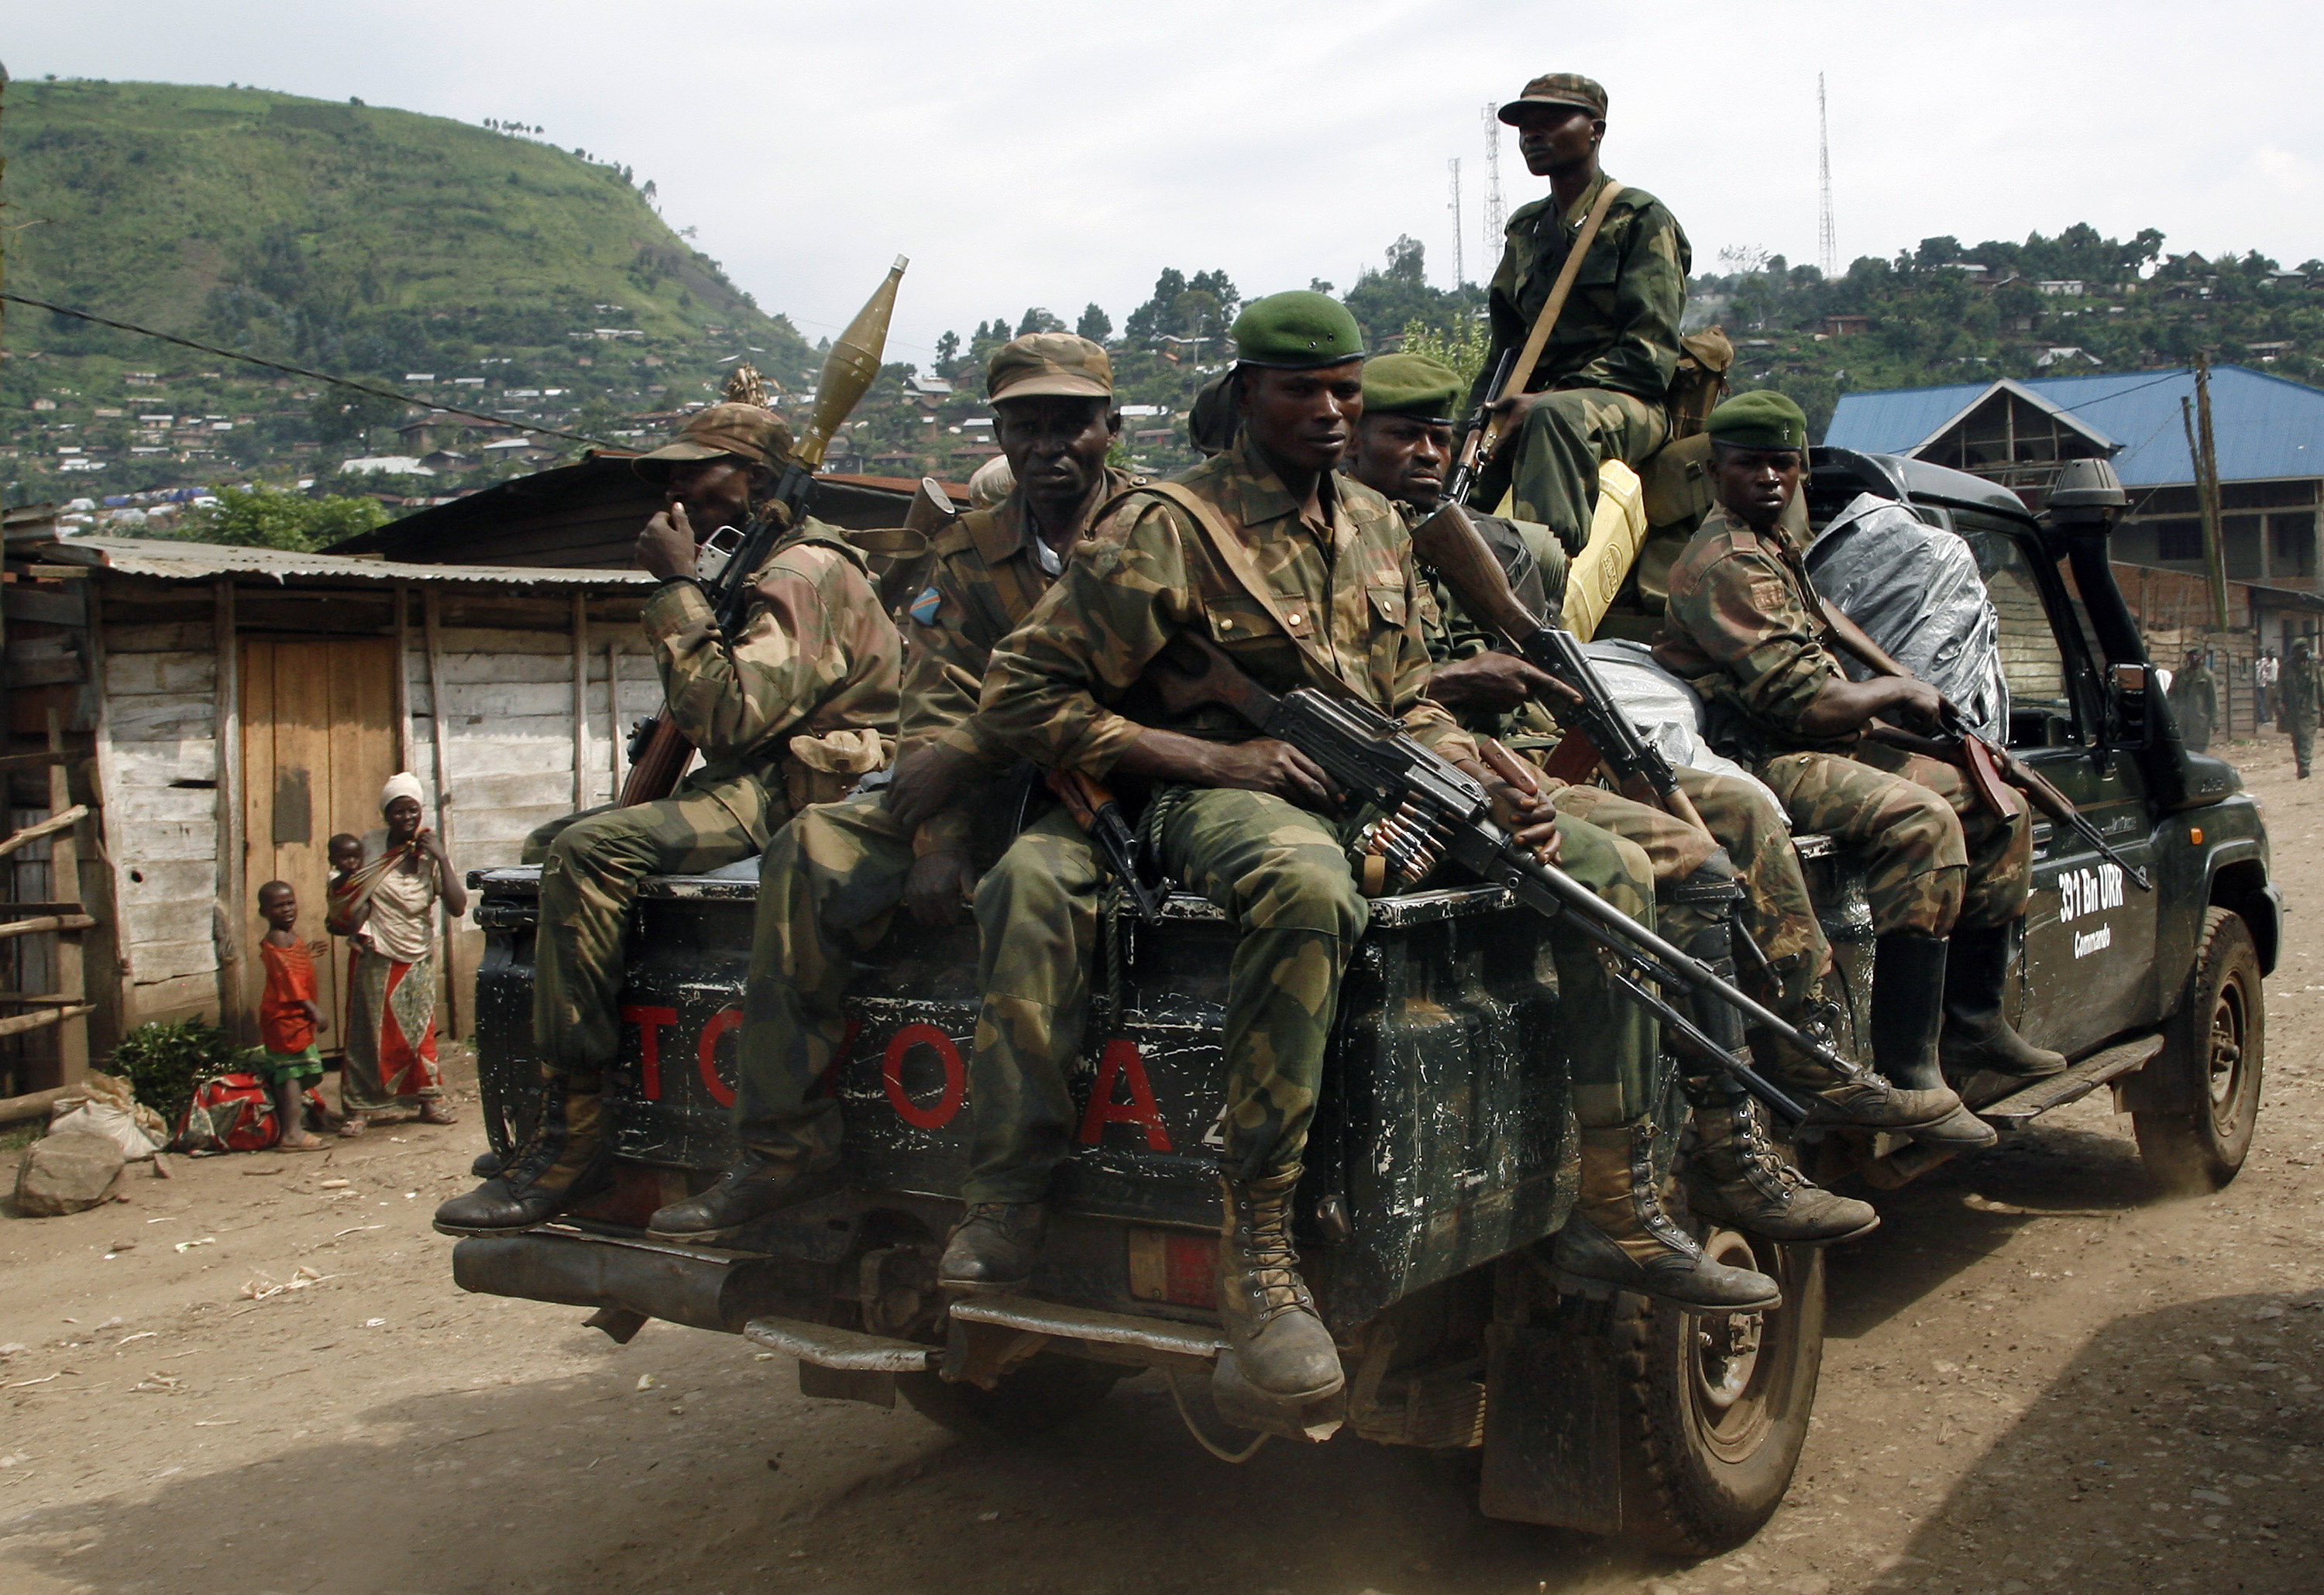 Stars and Stripes Op-ed: More U.S. can do to reform Congolese military